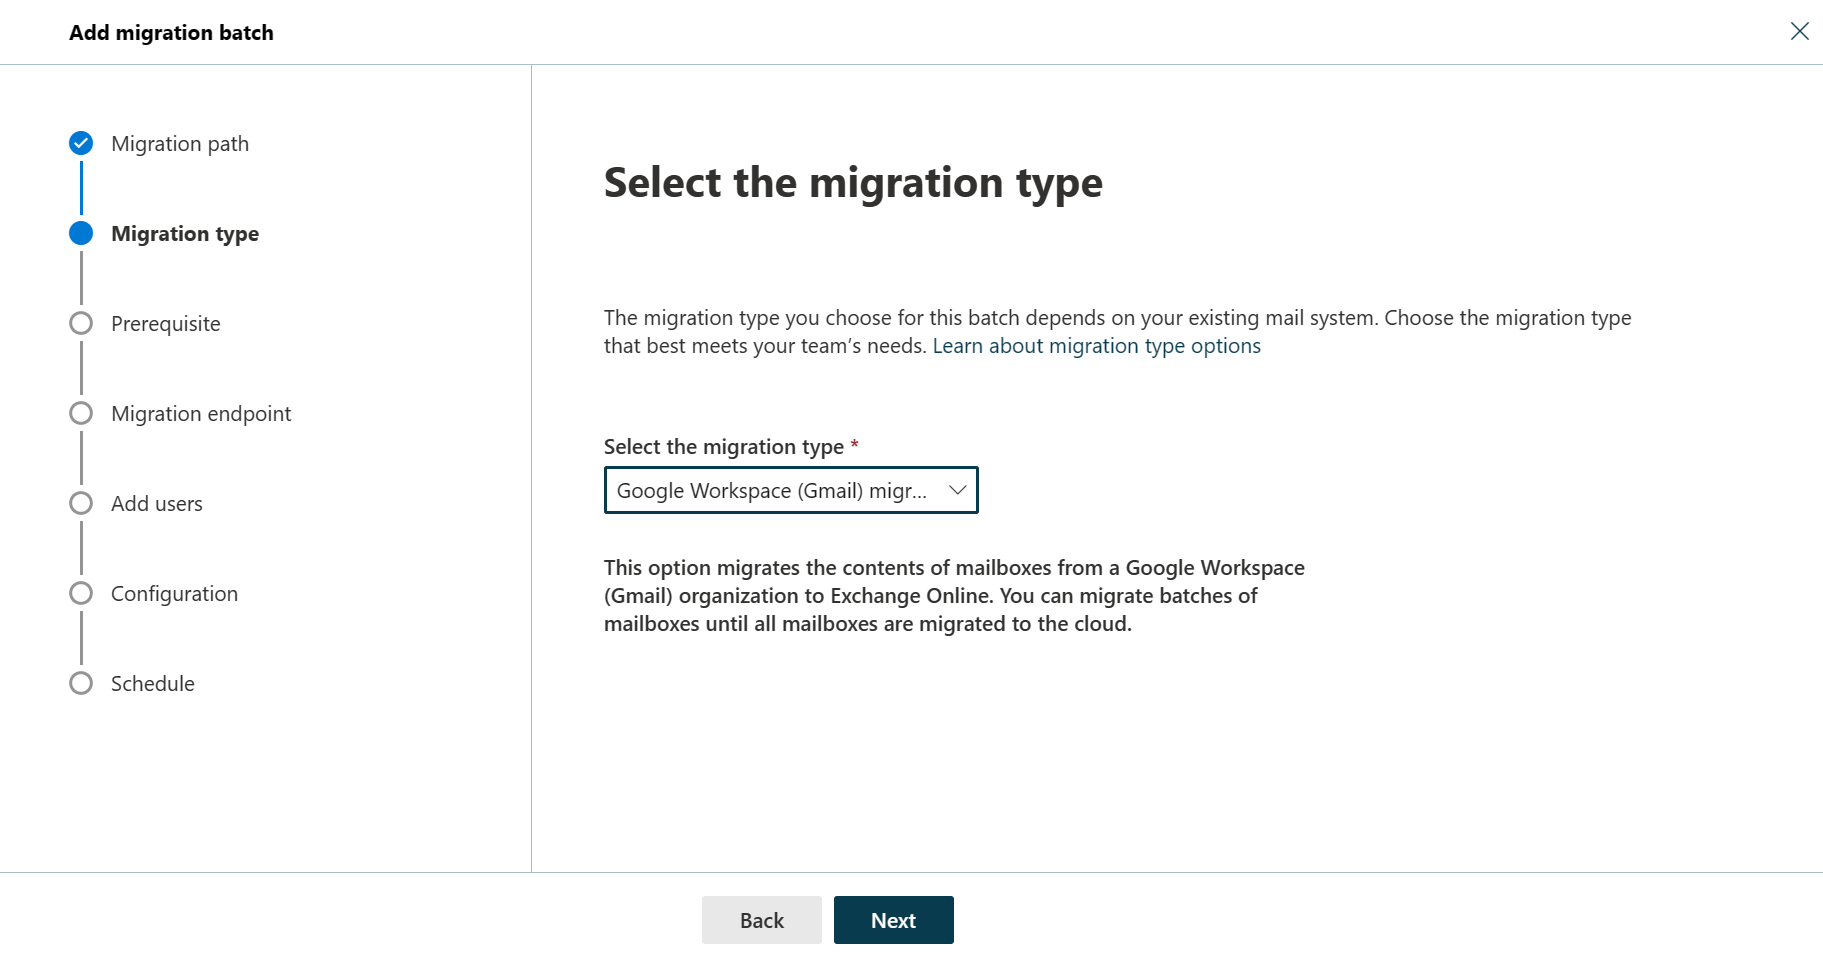 Screenshot of the second step of the migration batch wizard with the migration type selected as Google Workspace (Gmail) migration.